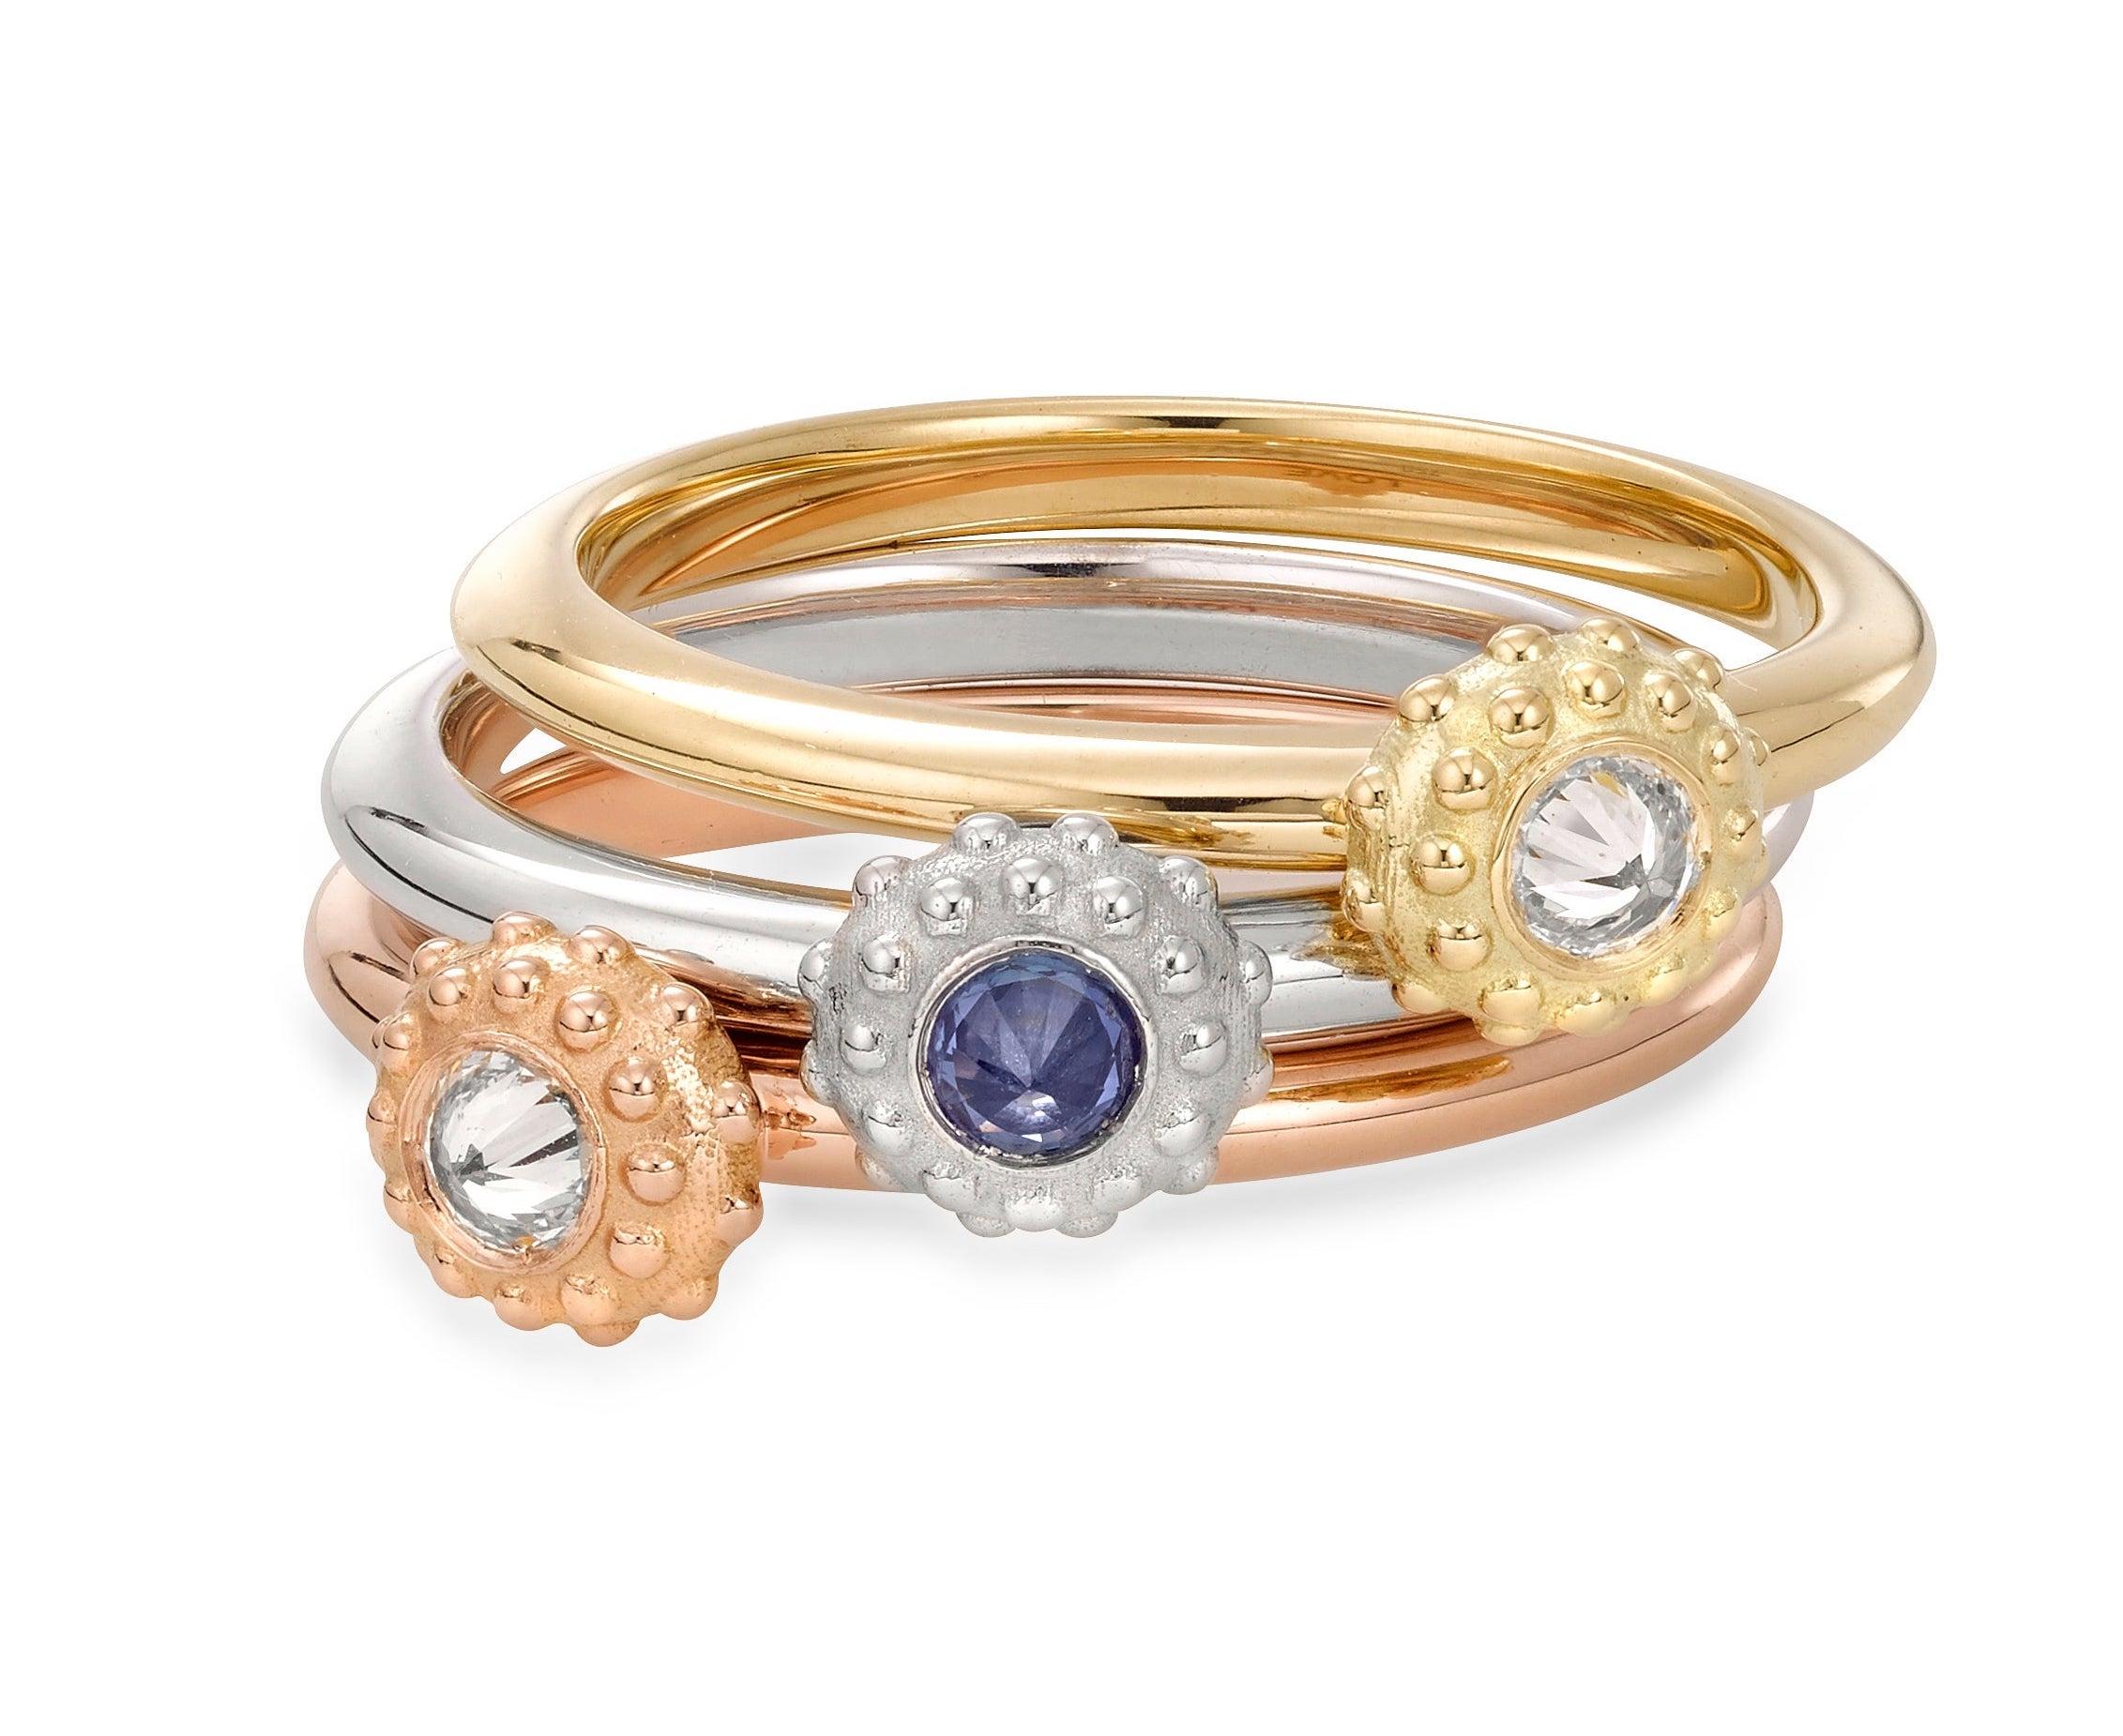 For Sale:  AnaKatarina Rose Gold and Diamond 'Evolution' Stacking Ring 6